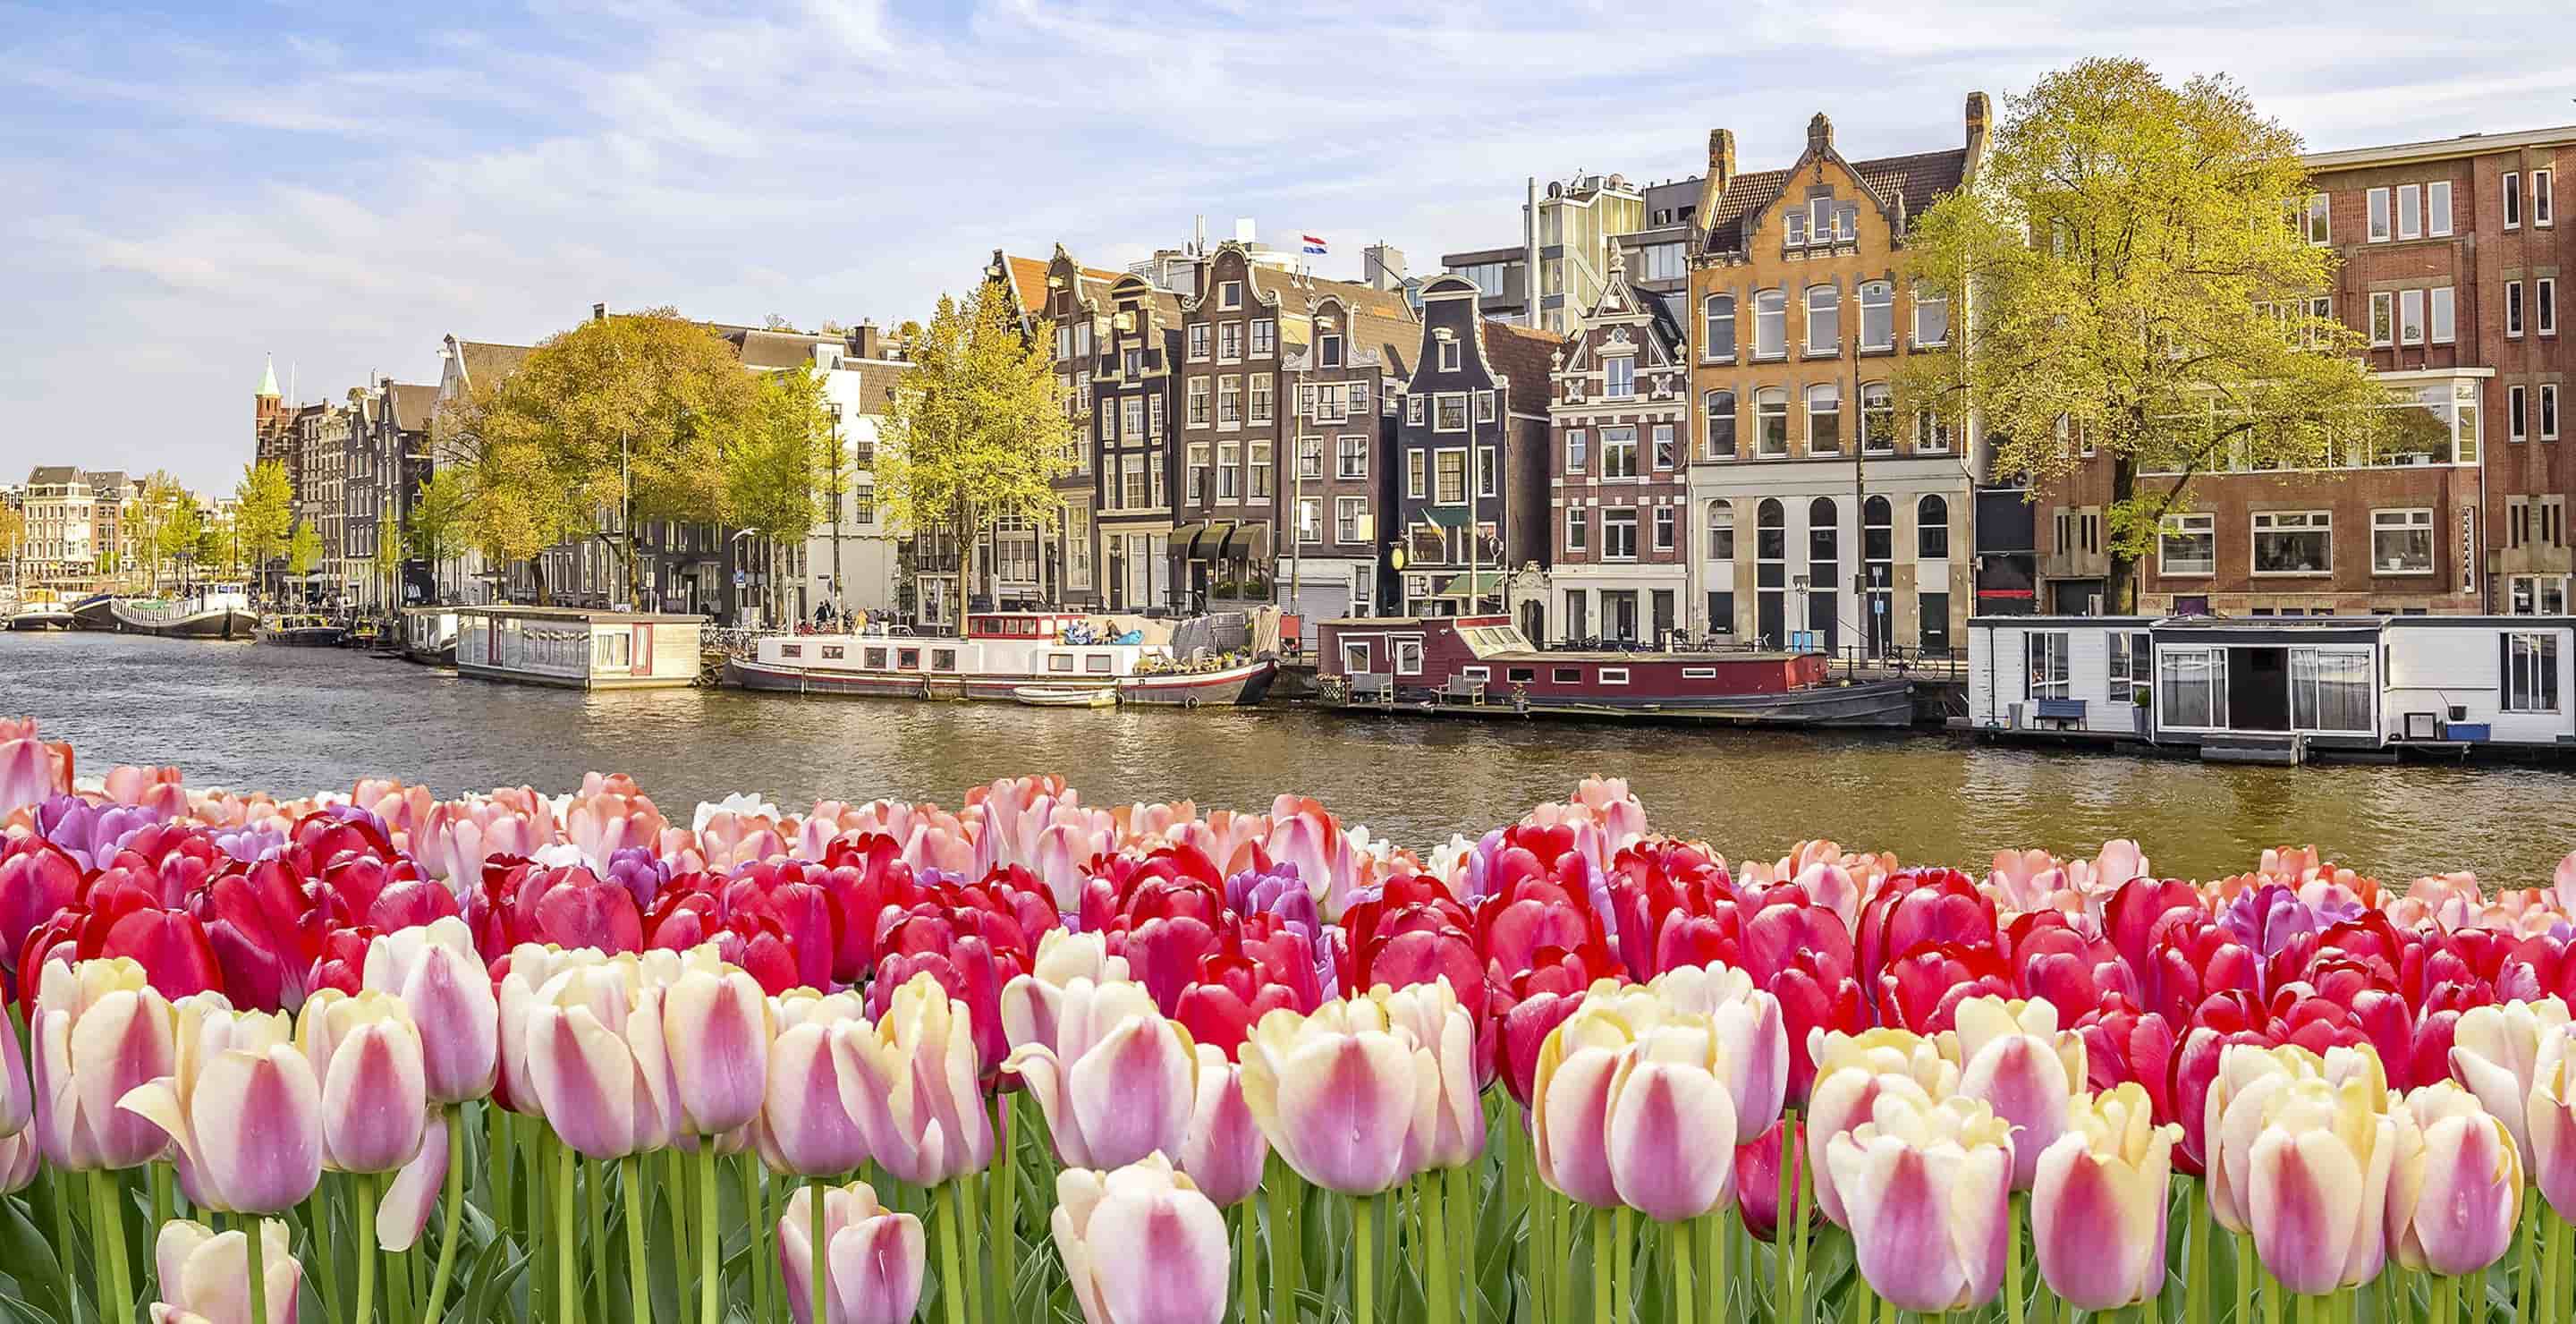 Eindhoven to Amsterdam-Centraal by Train | Tickets from €22.60 | Trainline